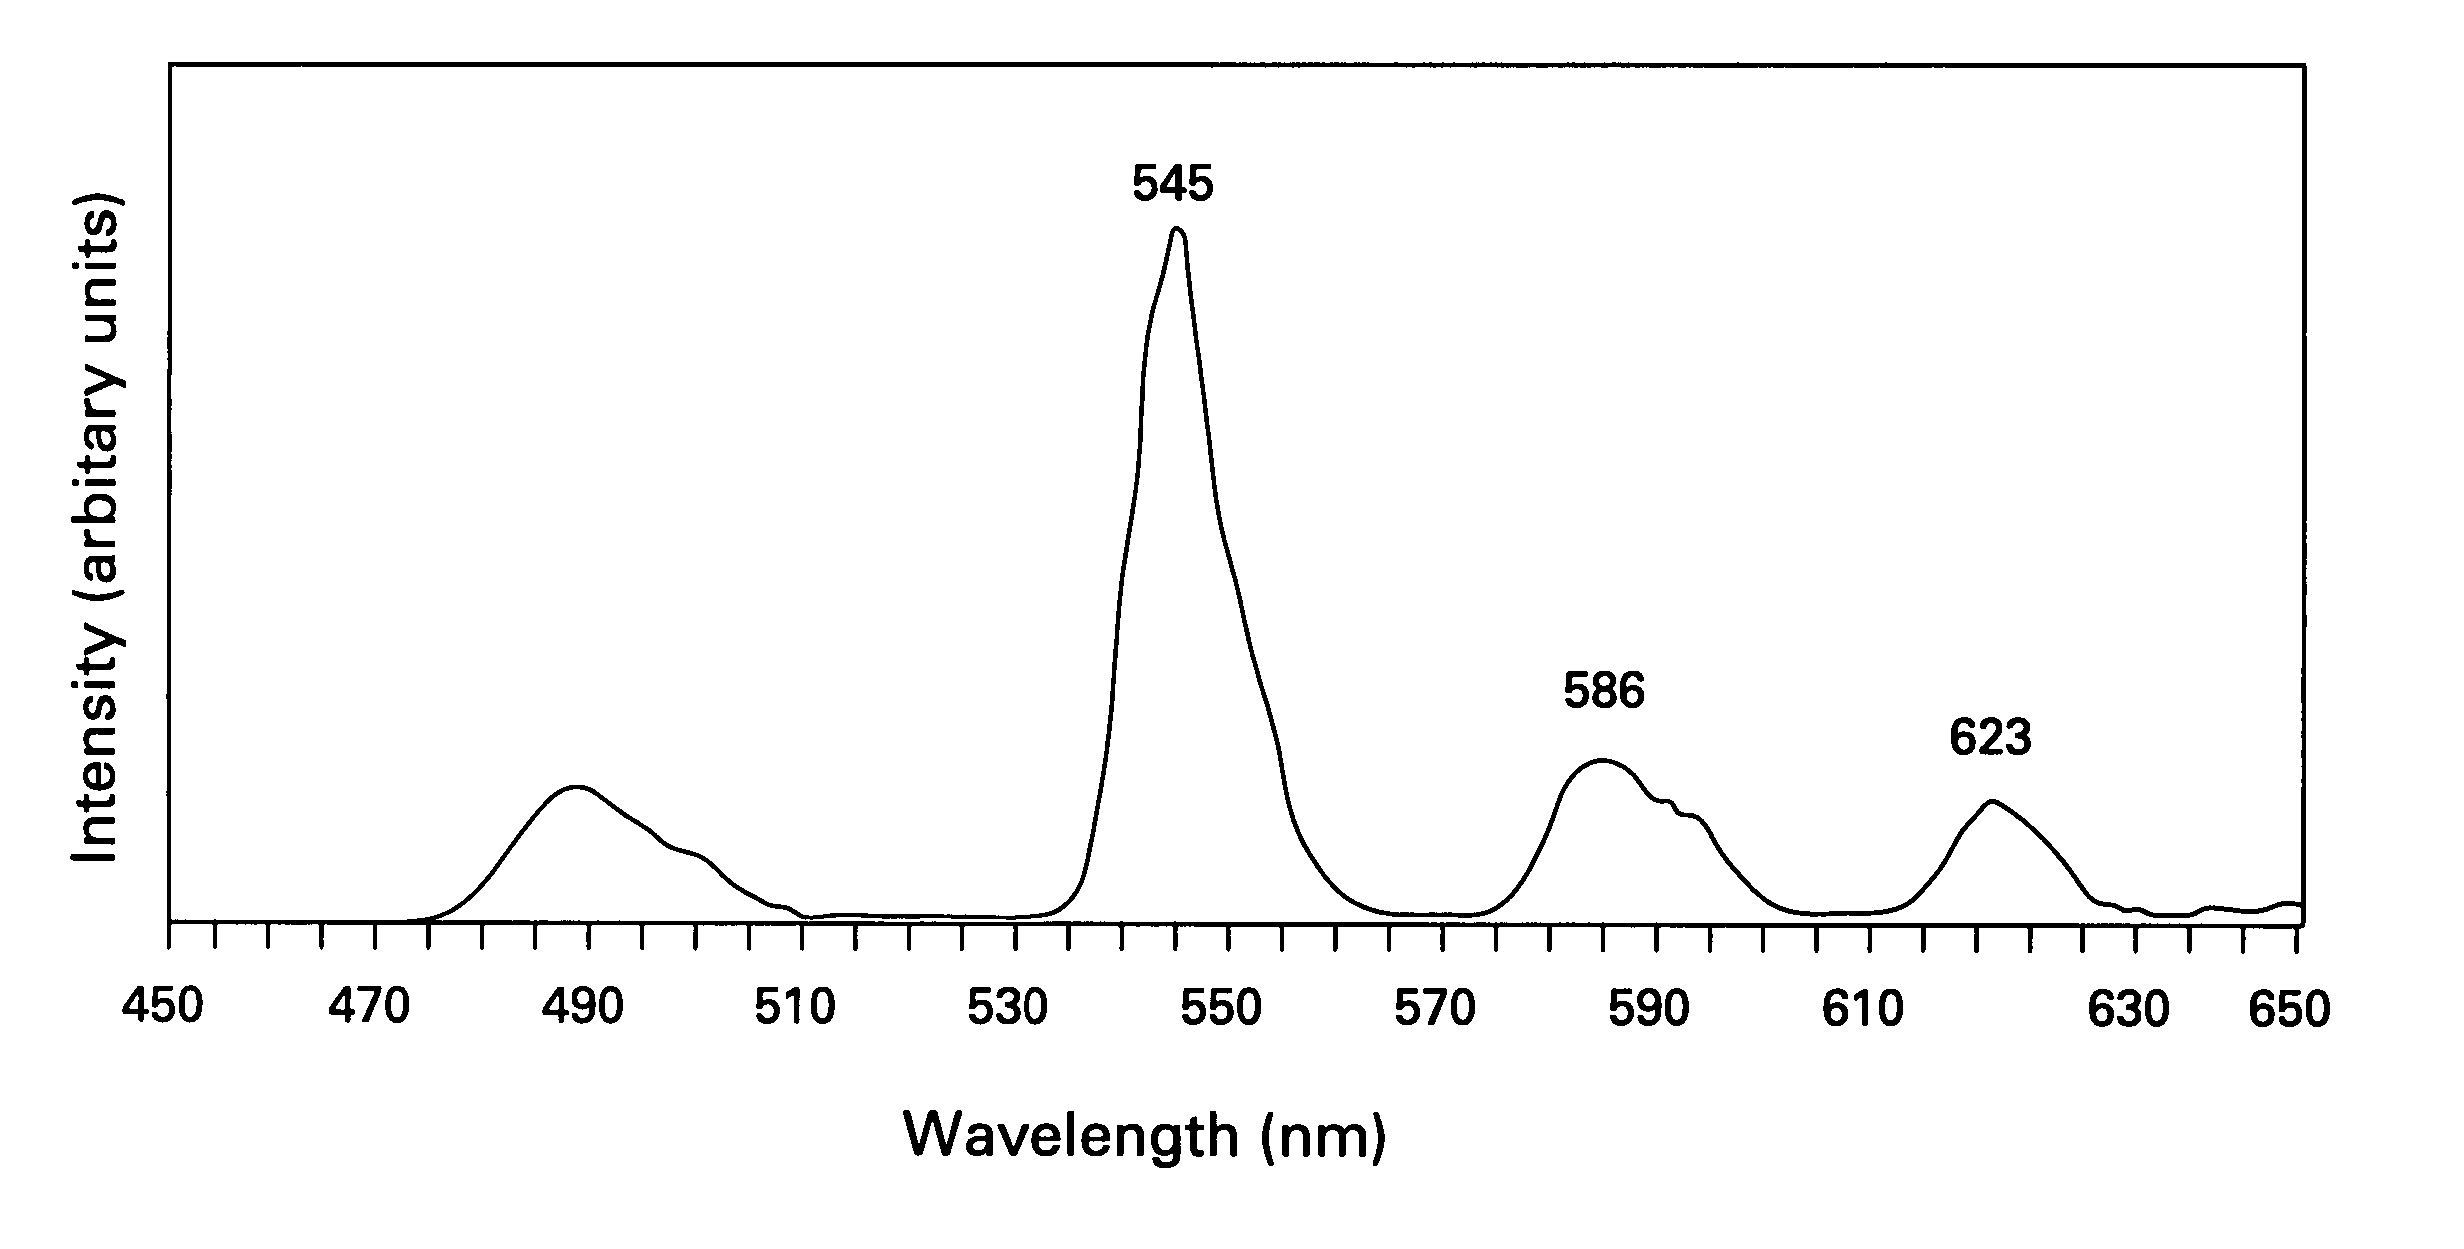 Phosphors containing borate of terbium, alkaline-earth, and Group-3 metals, and light sources incorporating the same